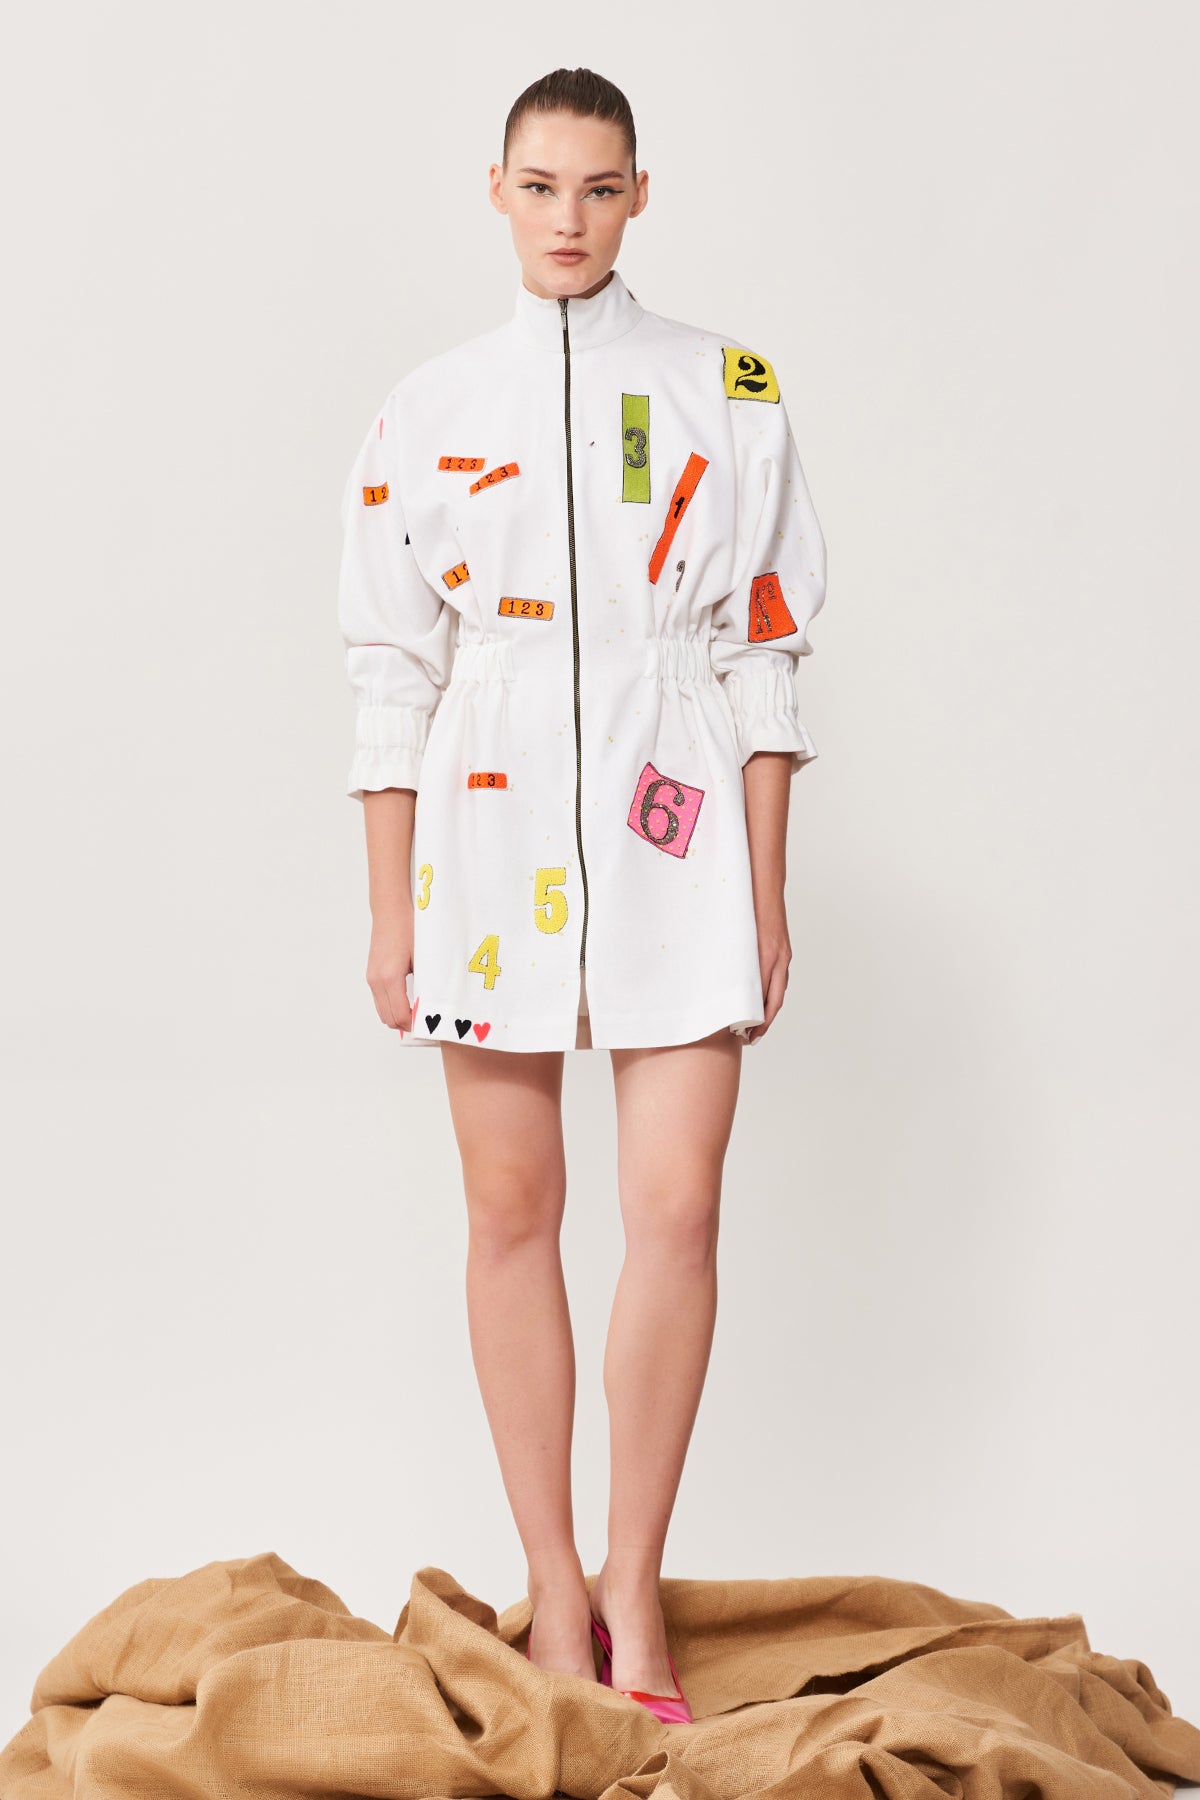 Odd and Even Numbers Jacket Dress